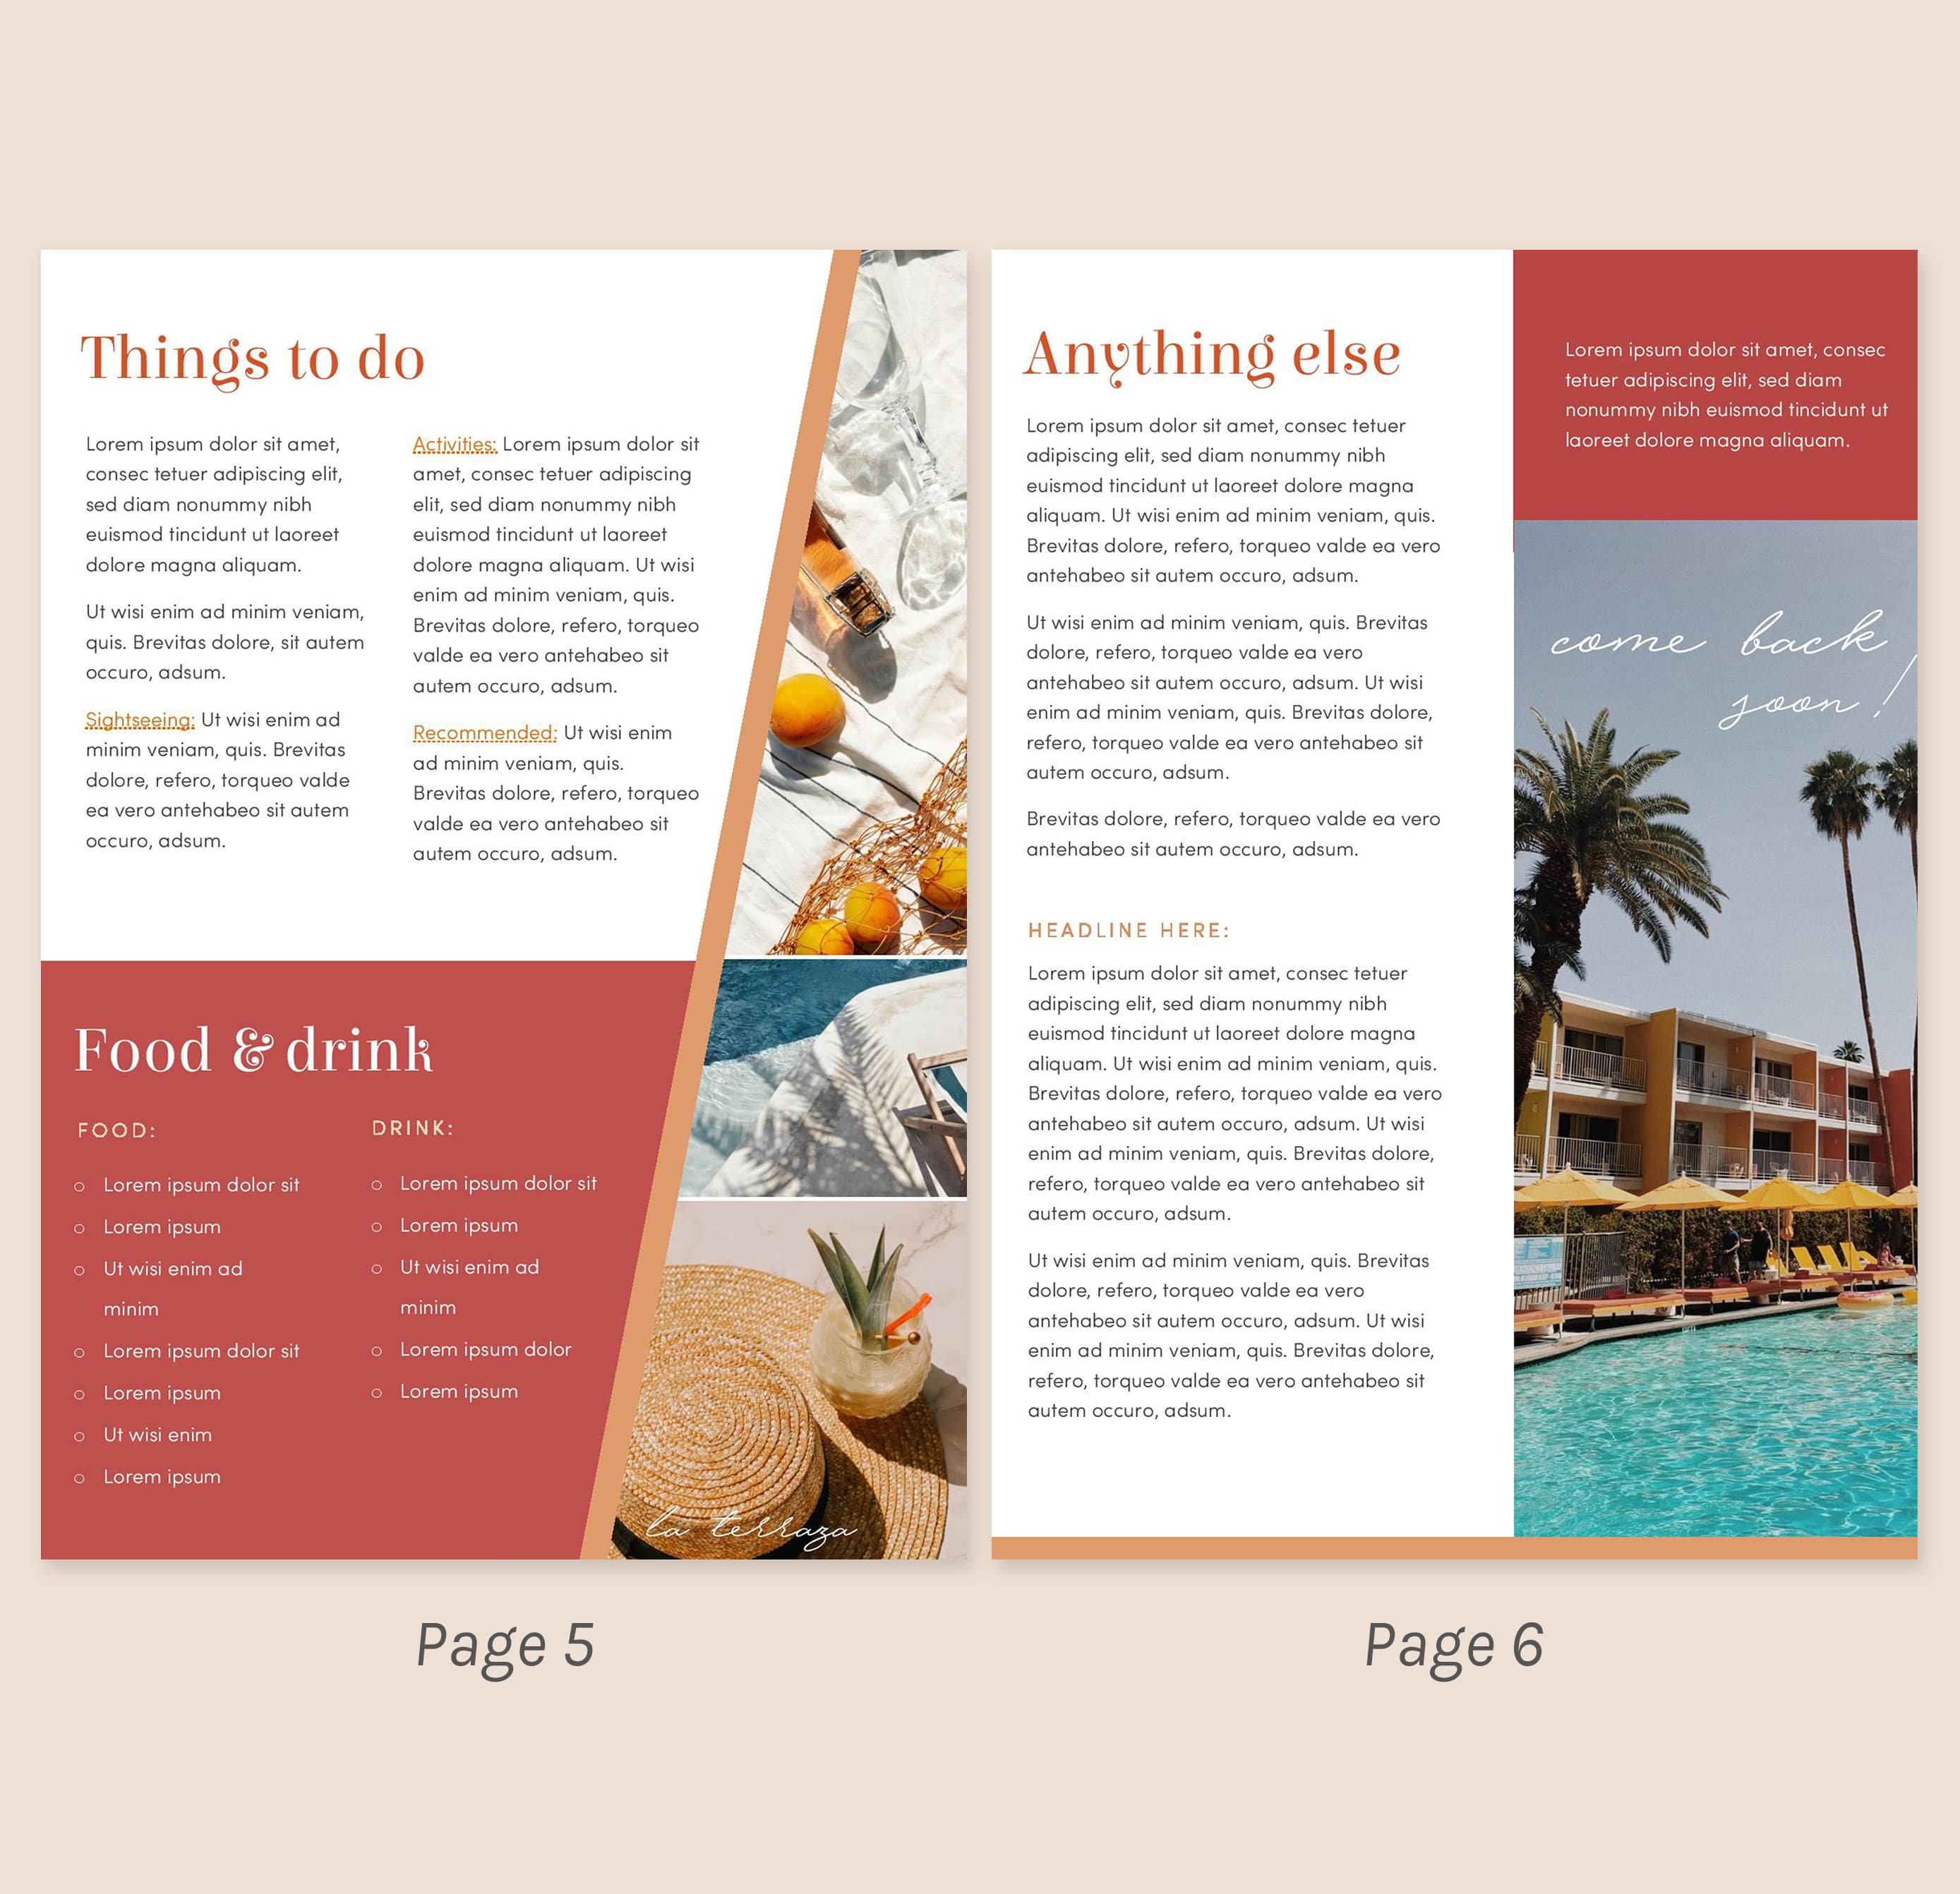 airbnb-welcome-book-template-by-brochure-design-on-dribbble